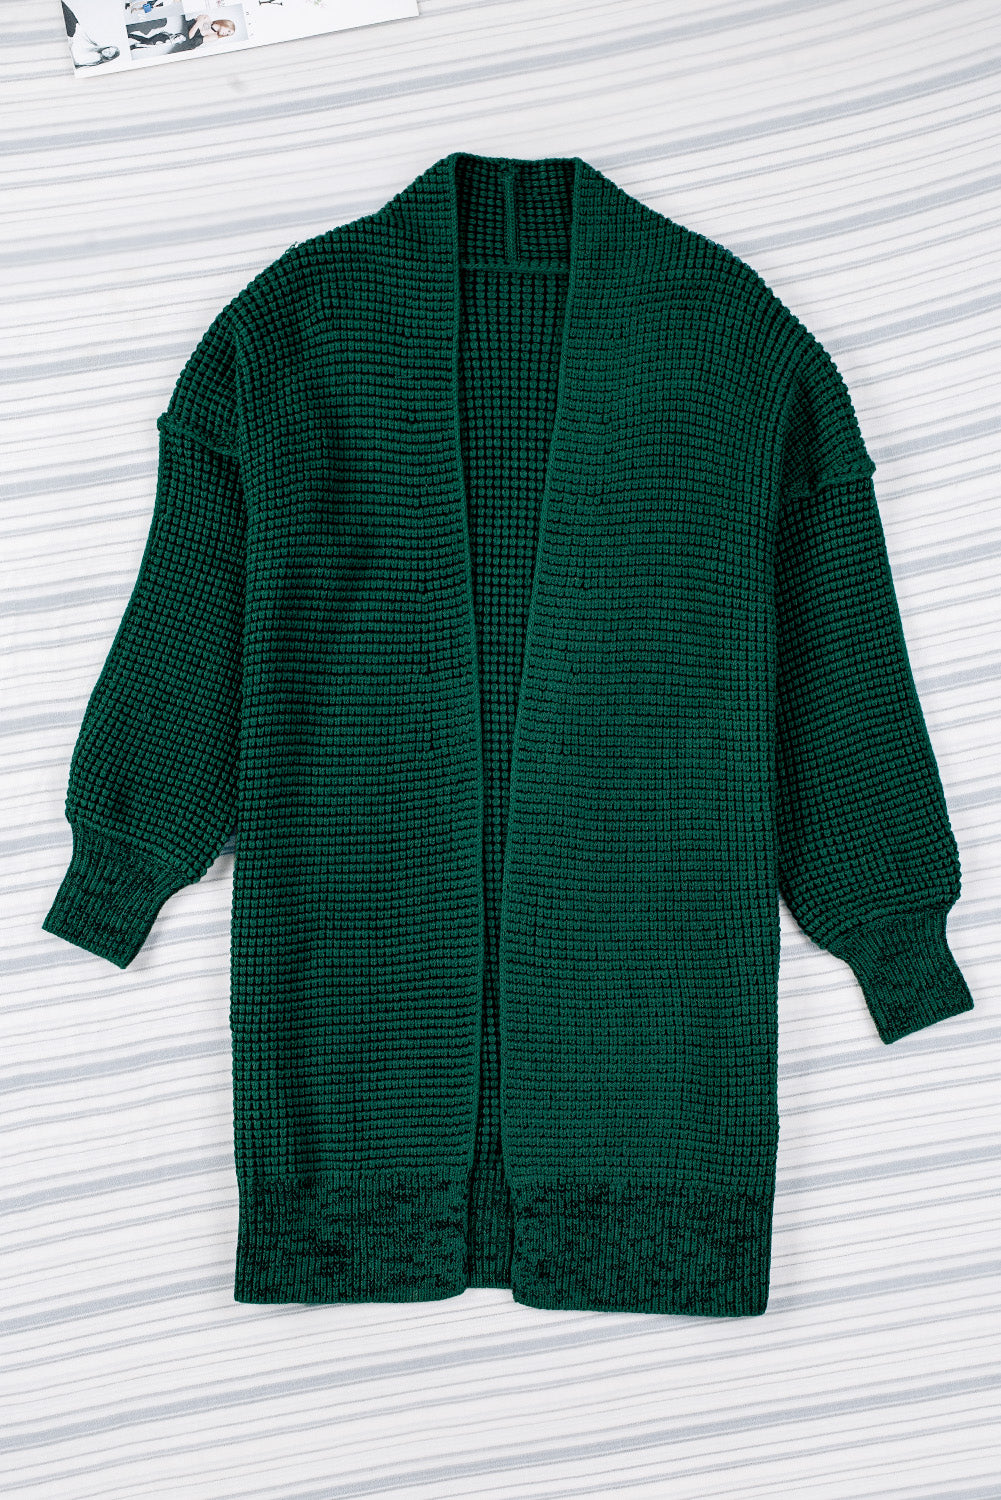 Heathered Open Front Longline Cardigan - Dark Green / S - Women’s Clothing & Accessories - Shirts & Tops - 26 - 2024